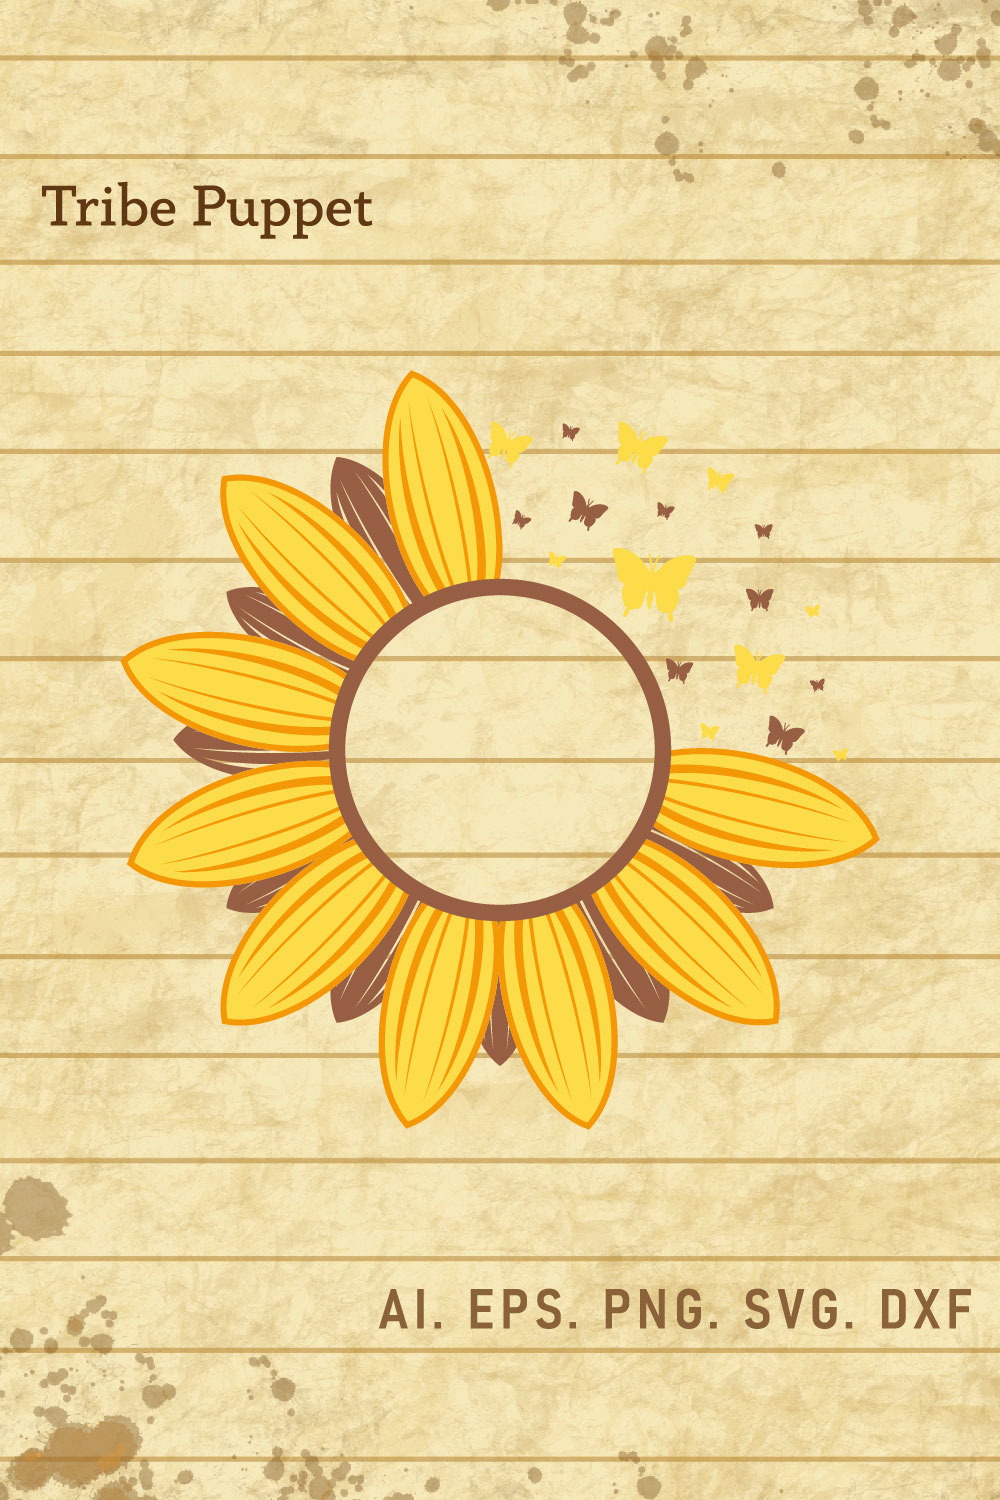 Sunflower 14 pinterest preview image.